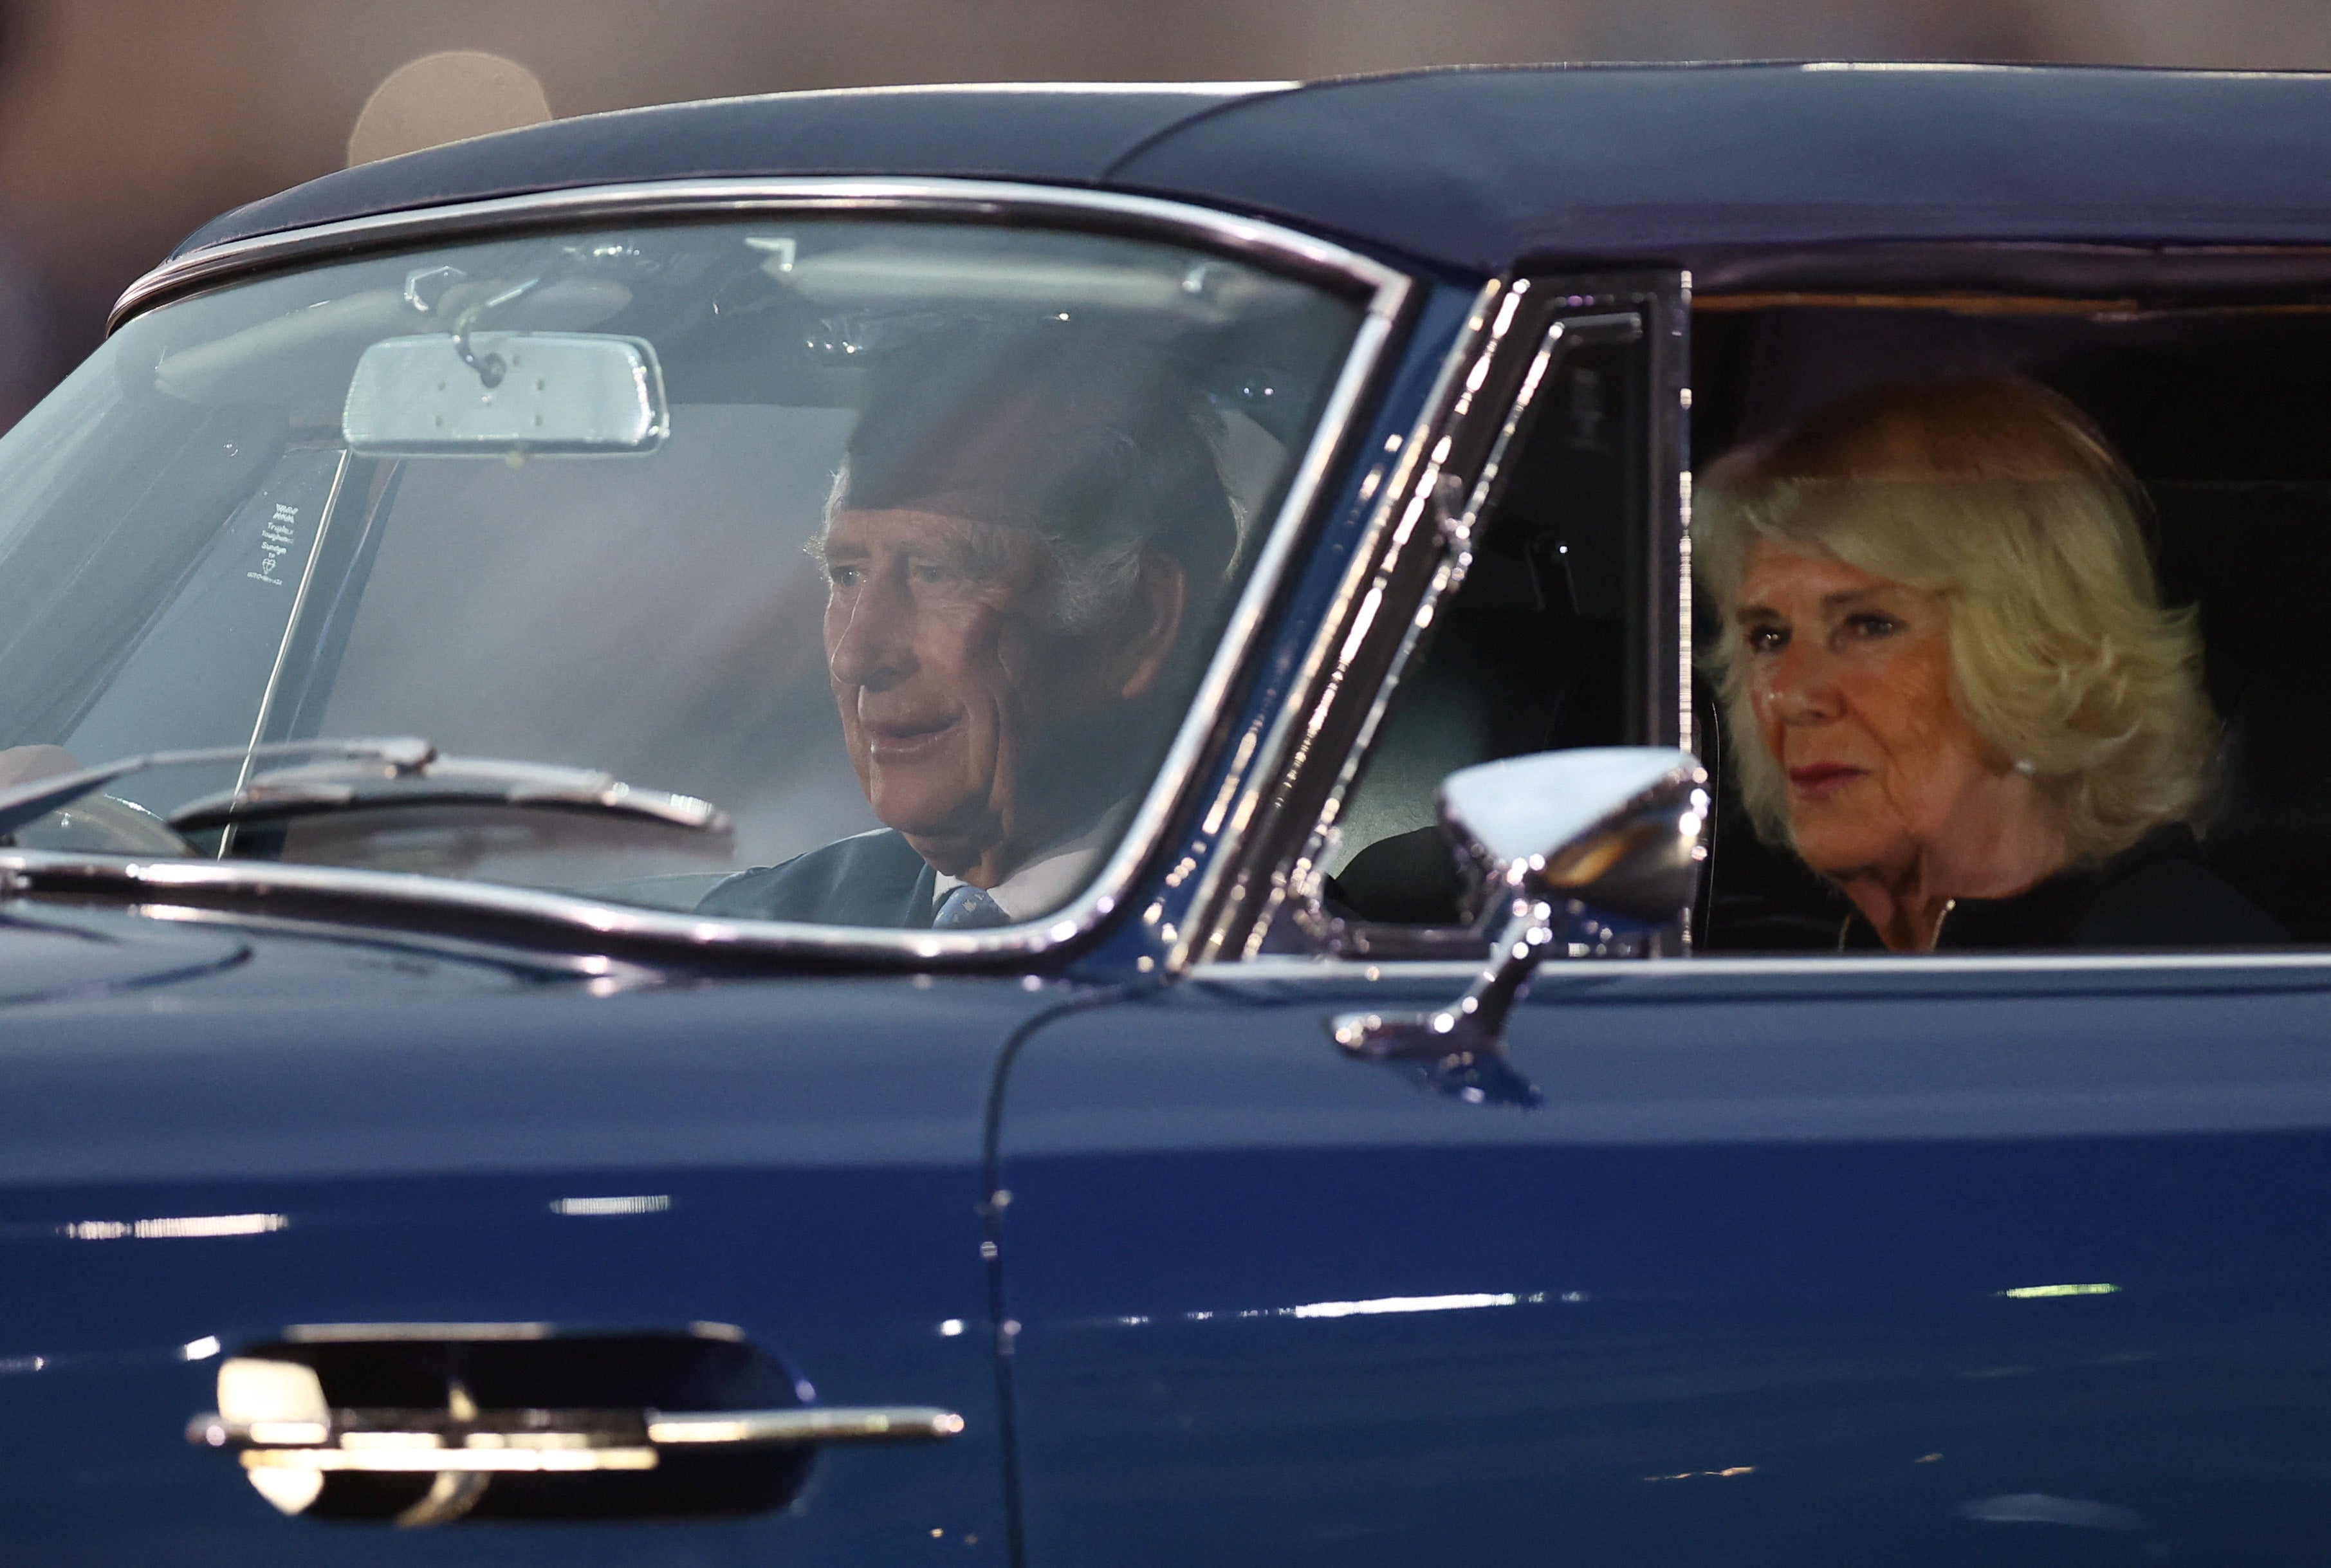 Prince Charles drove himself into the stadium in a vintage car